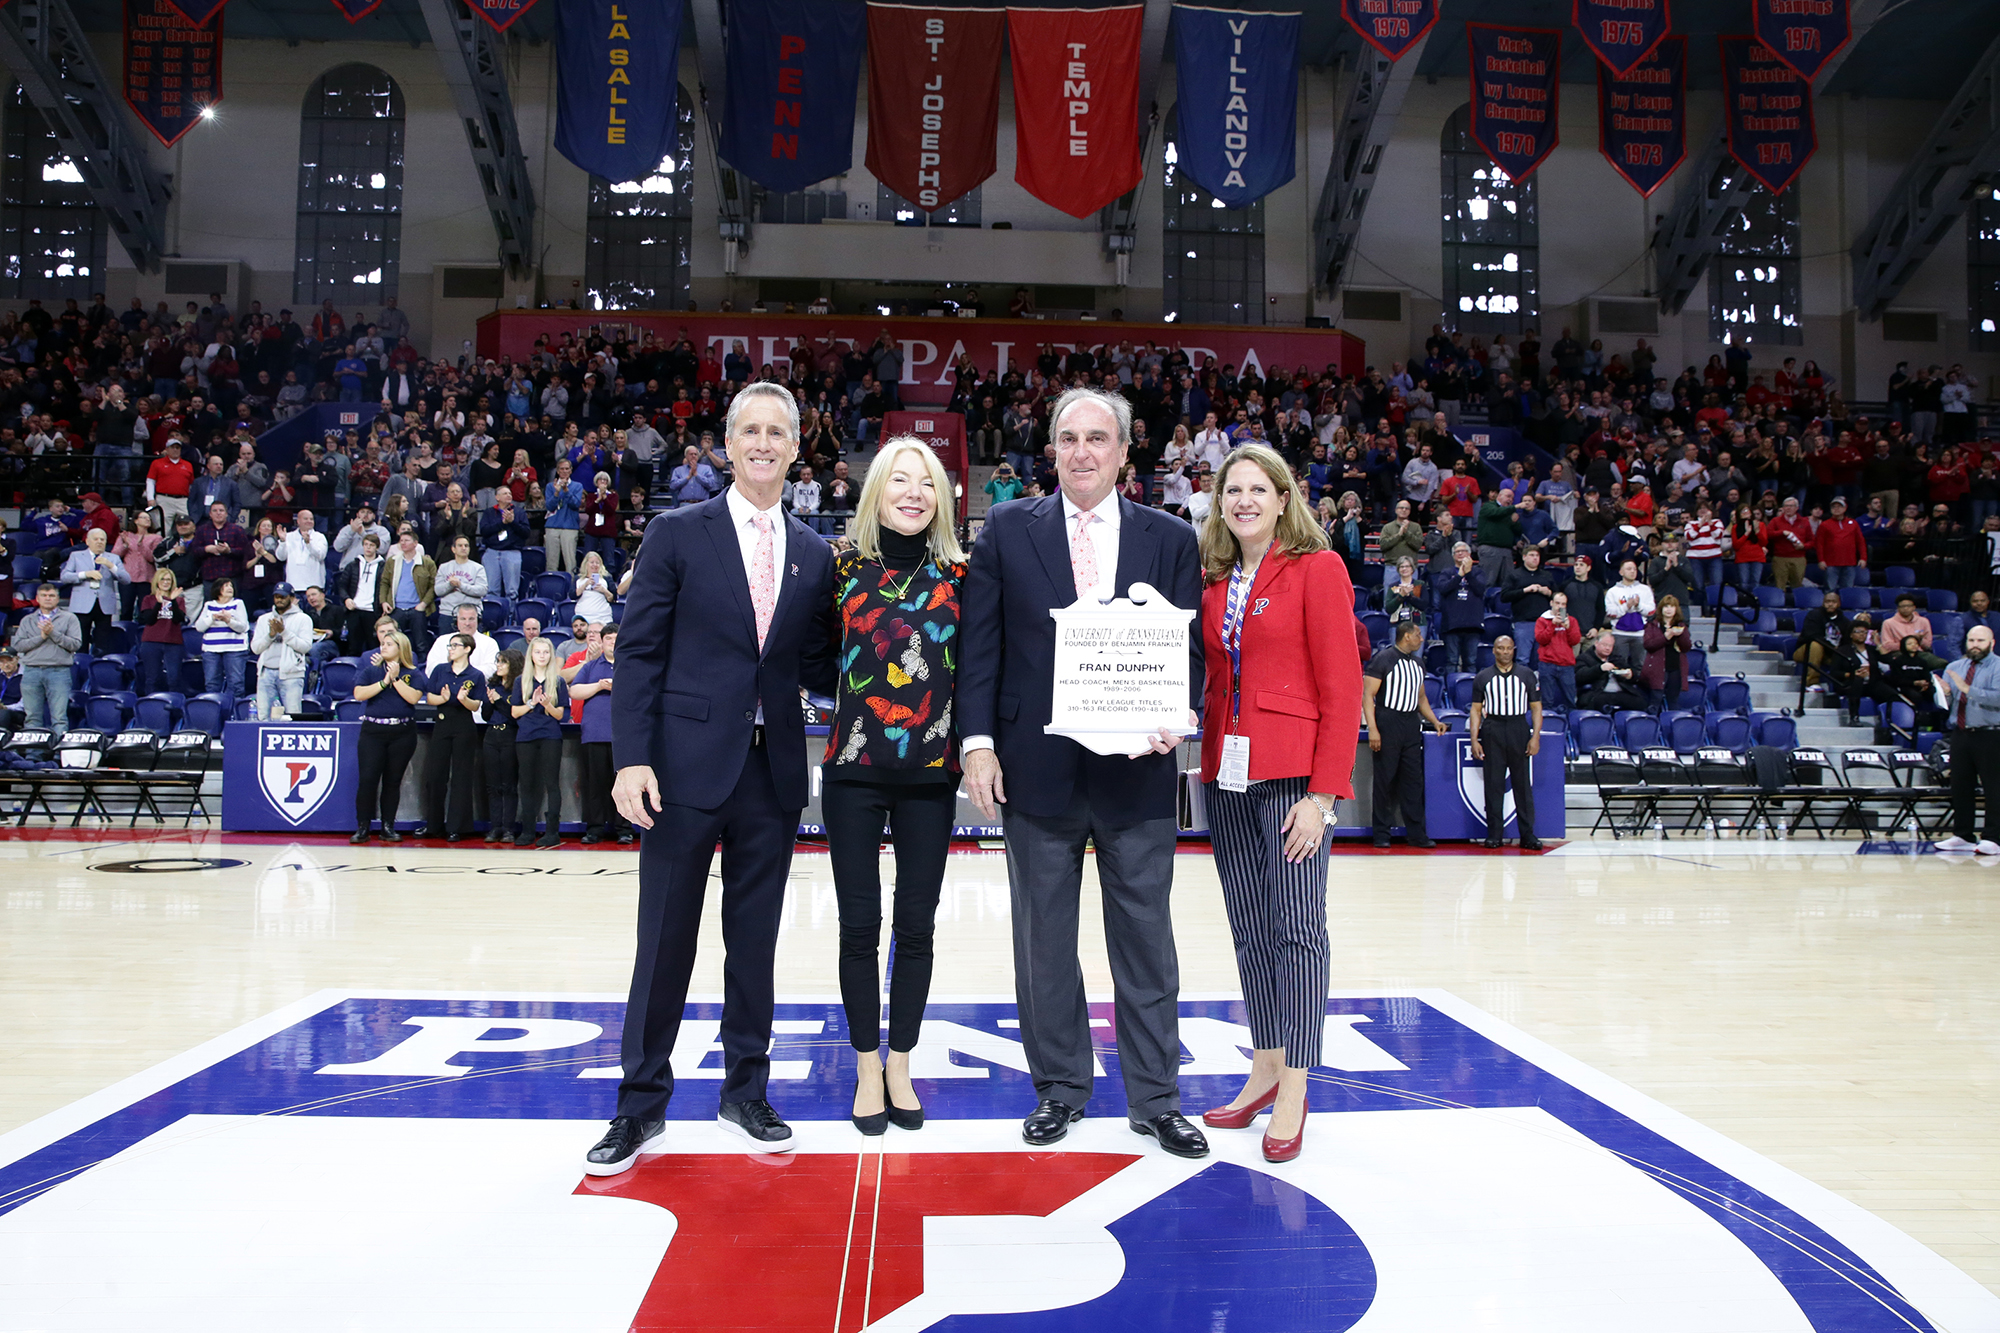 Fran Dunphy is honored during the Penn vs. Temple basketball game. He stands with Coach Donahue, President Gutmann, and AD Calhoun.